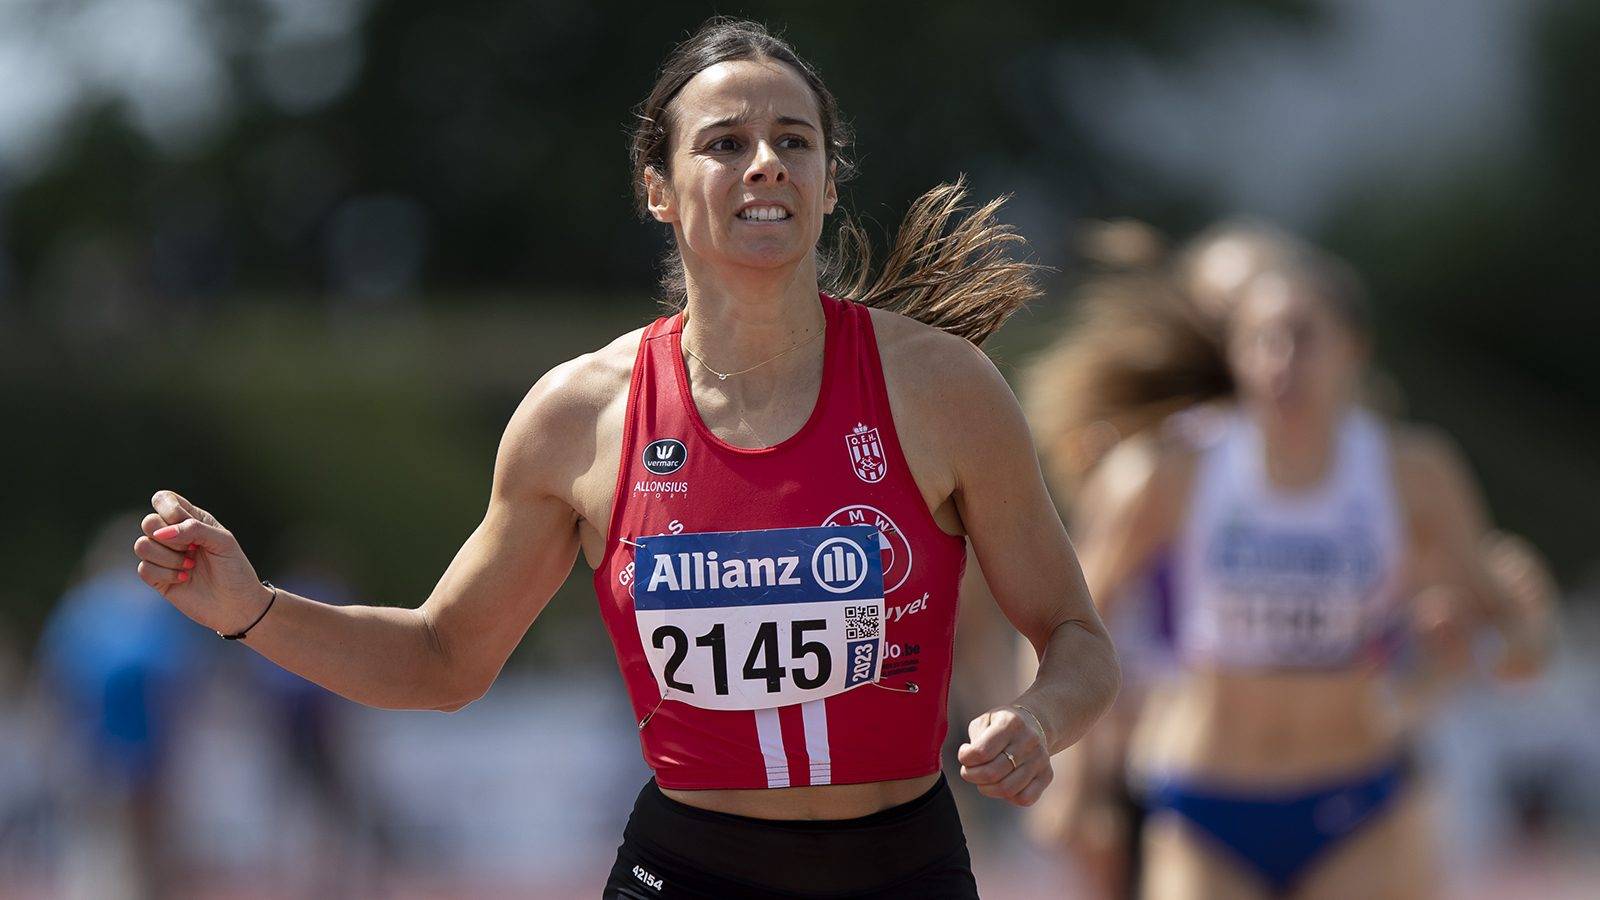 Belgian Camille Laus pictured after winning the women's 800m race, at the Belgian athletics championships, Sunday 30 July 2023 in Brugge. This years edition of the Belgian athletics championships takes place from July 29 to July 30, 2023. BELGA PHOTO KRISTOF VAN ACCOM